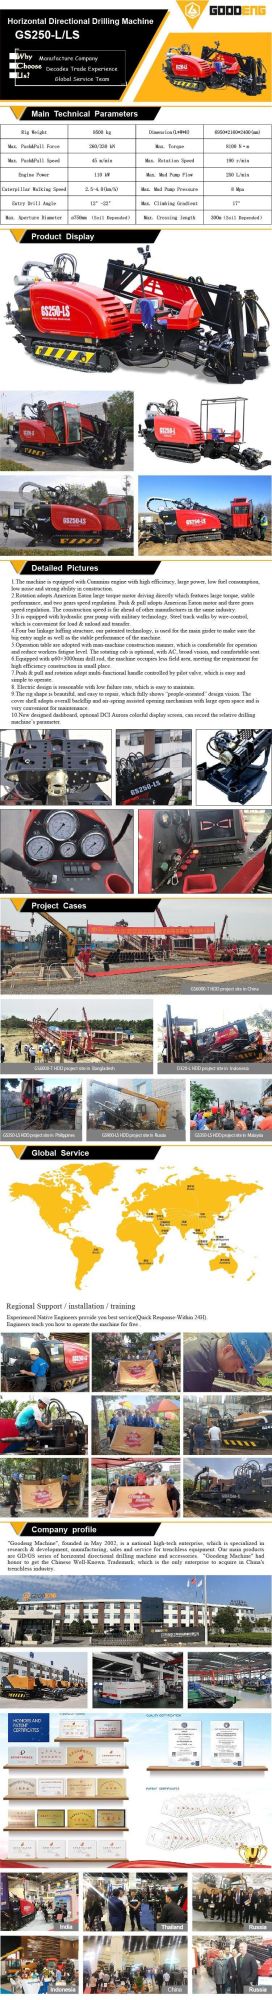 25T No-excavate rig hdd machine for underground pipeline with high digging power